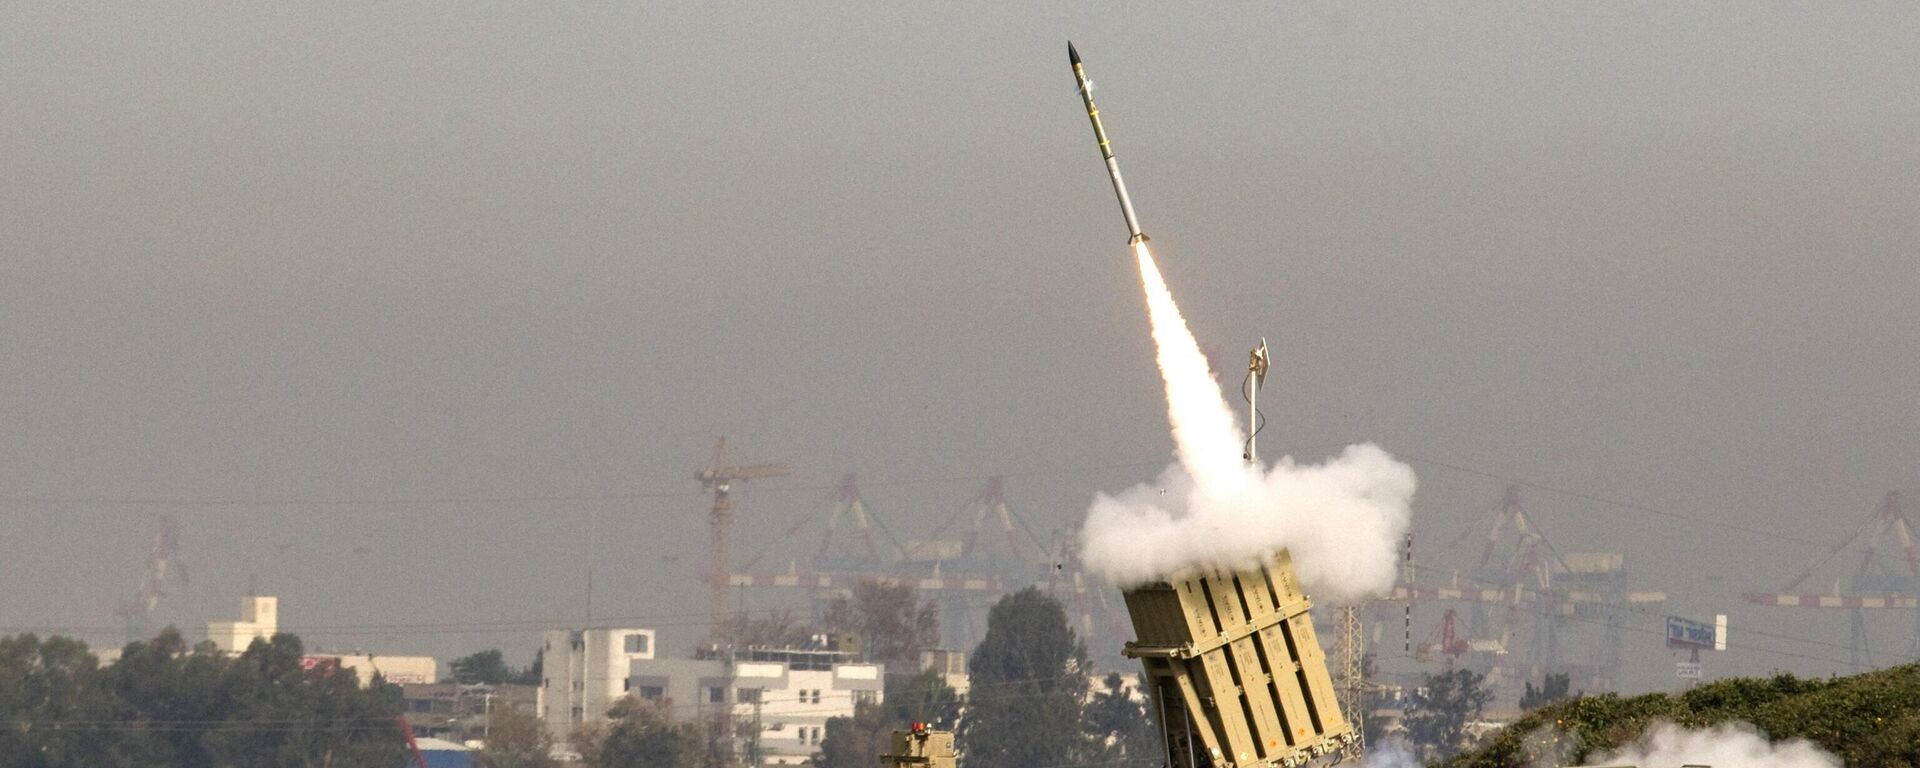 An Israeli missile is launched from the Iron Dome missile system in the city of Ashdod in response to a rocket launch from the nearby Palestinian Gaza Strip on March 11, 2012 - Sputnik International, 1920, 23.09.2021